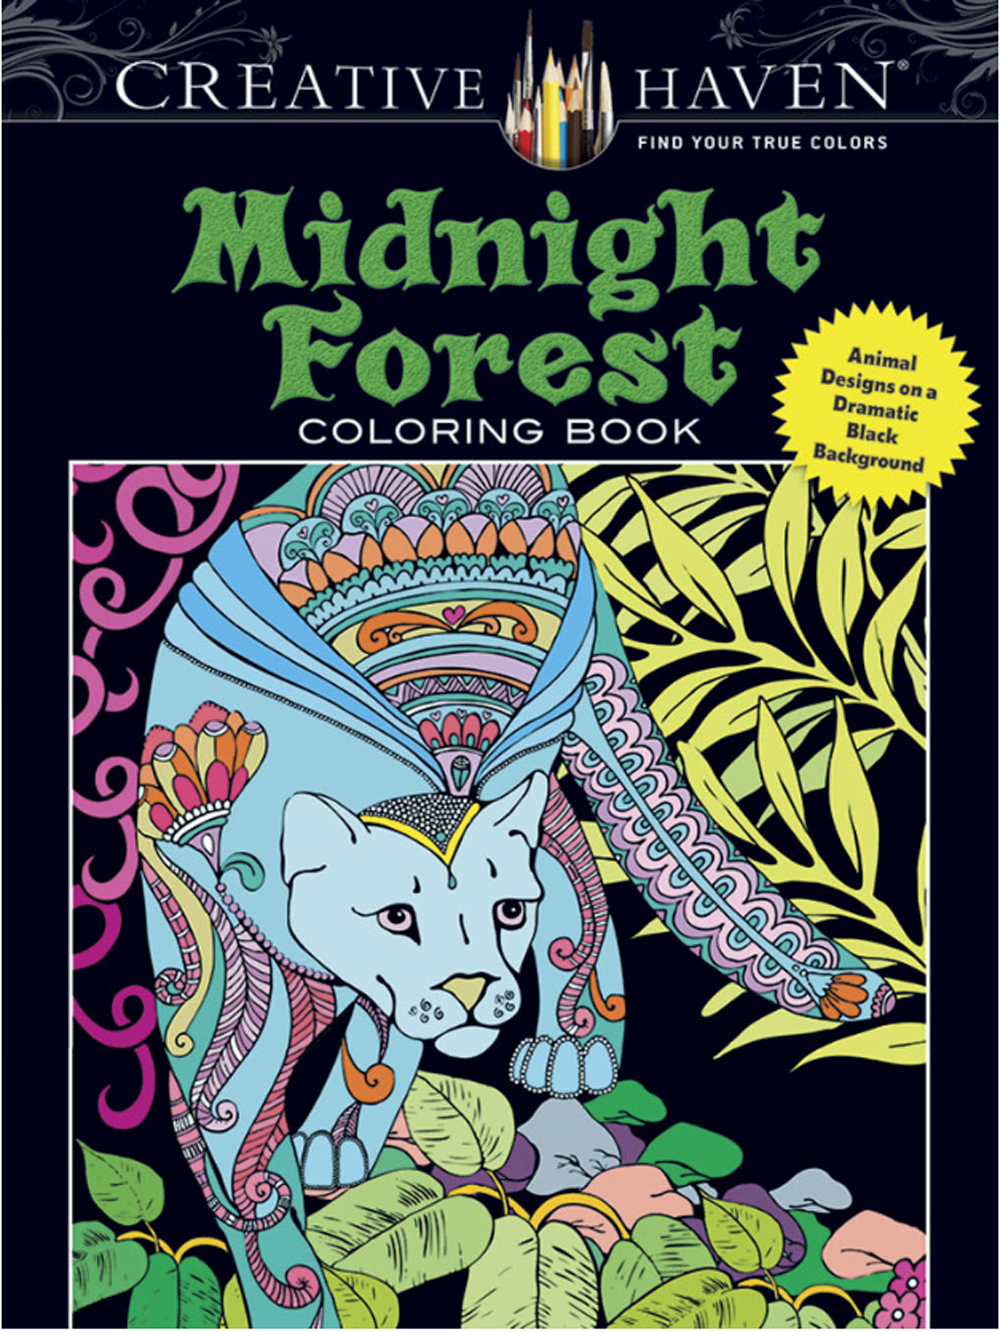 Creative Haven Coloring Book Midnight Forest